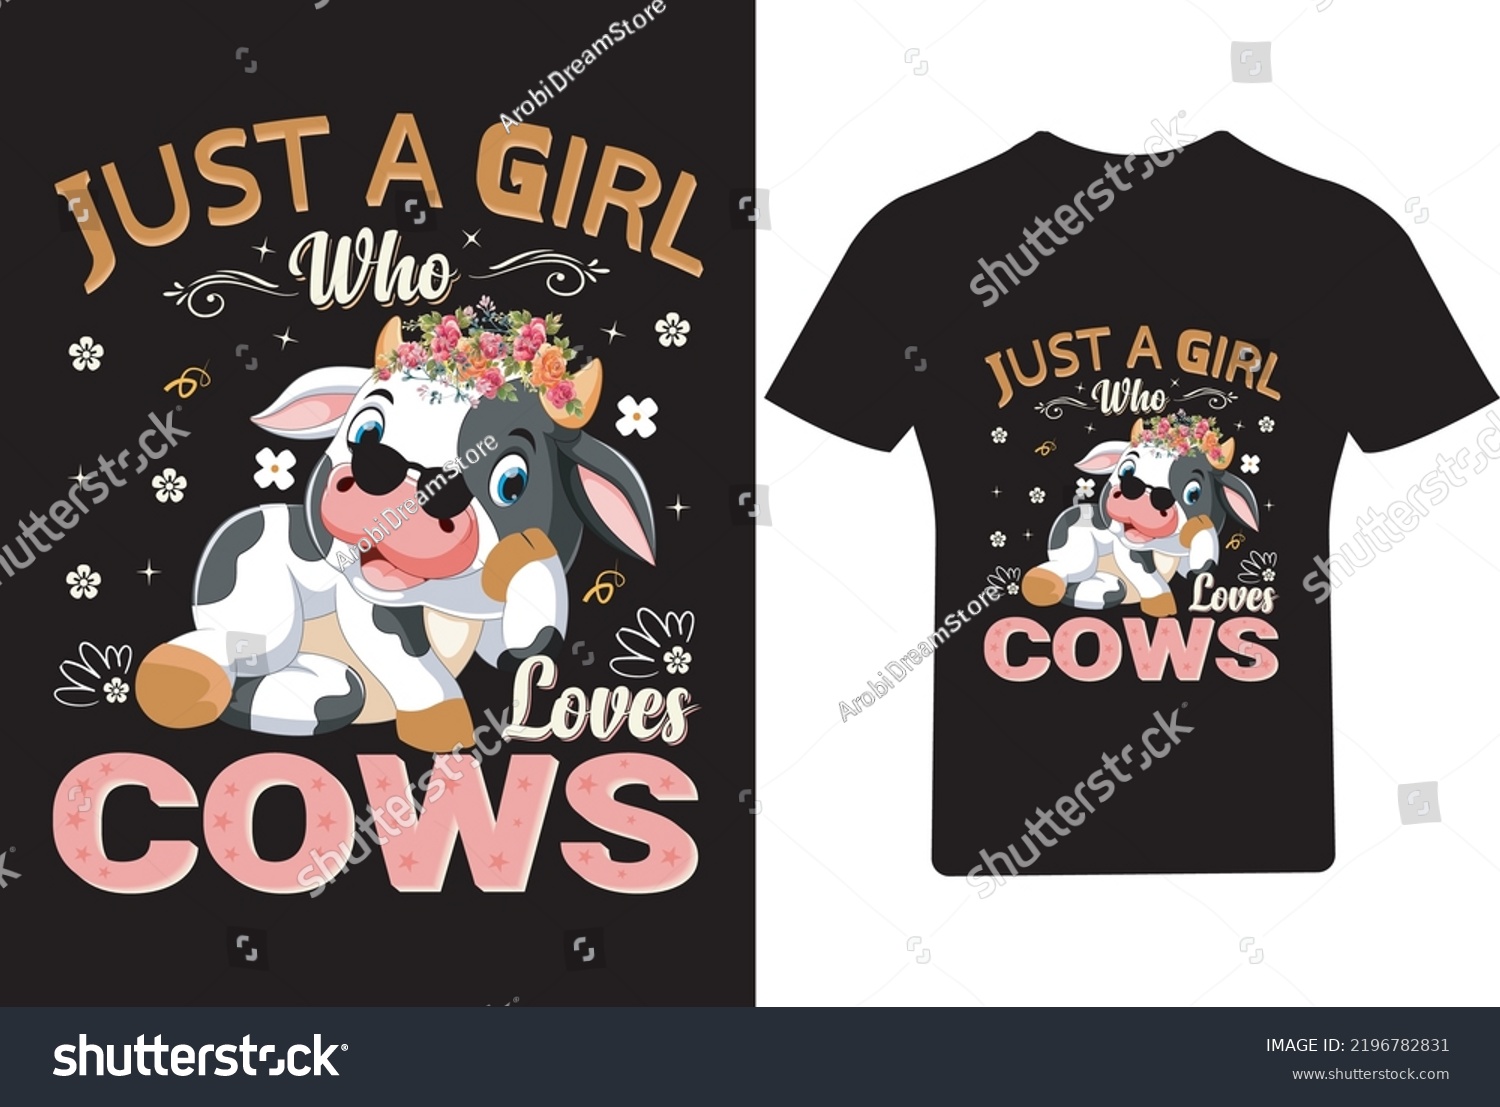 SVG of Just a Girl who loves cows T Shirt, Cow T Shirt Design svg